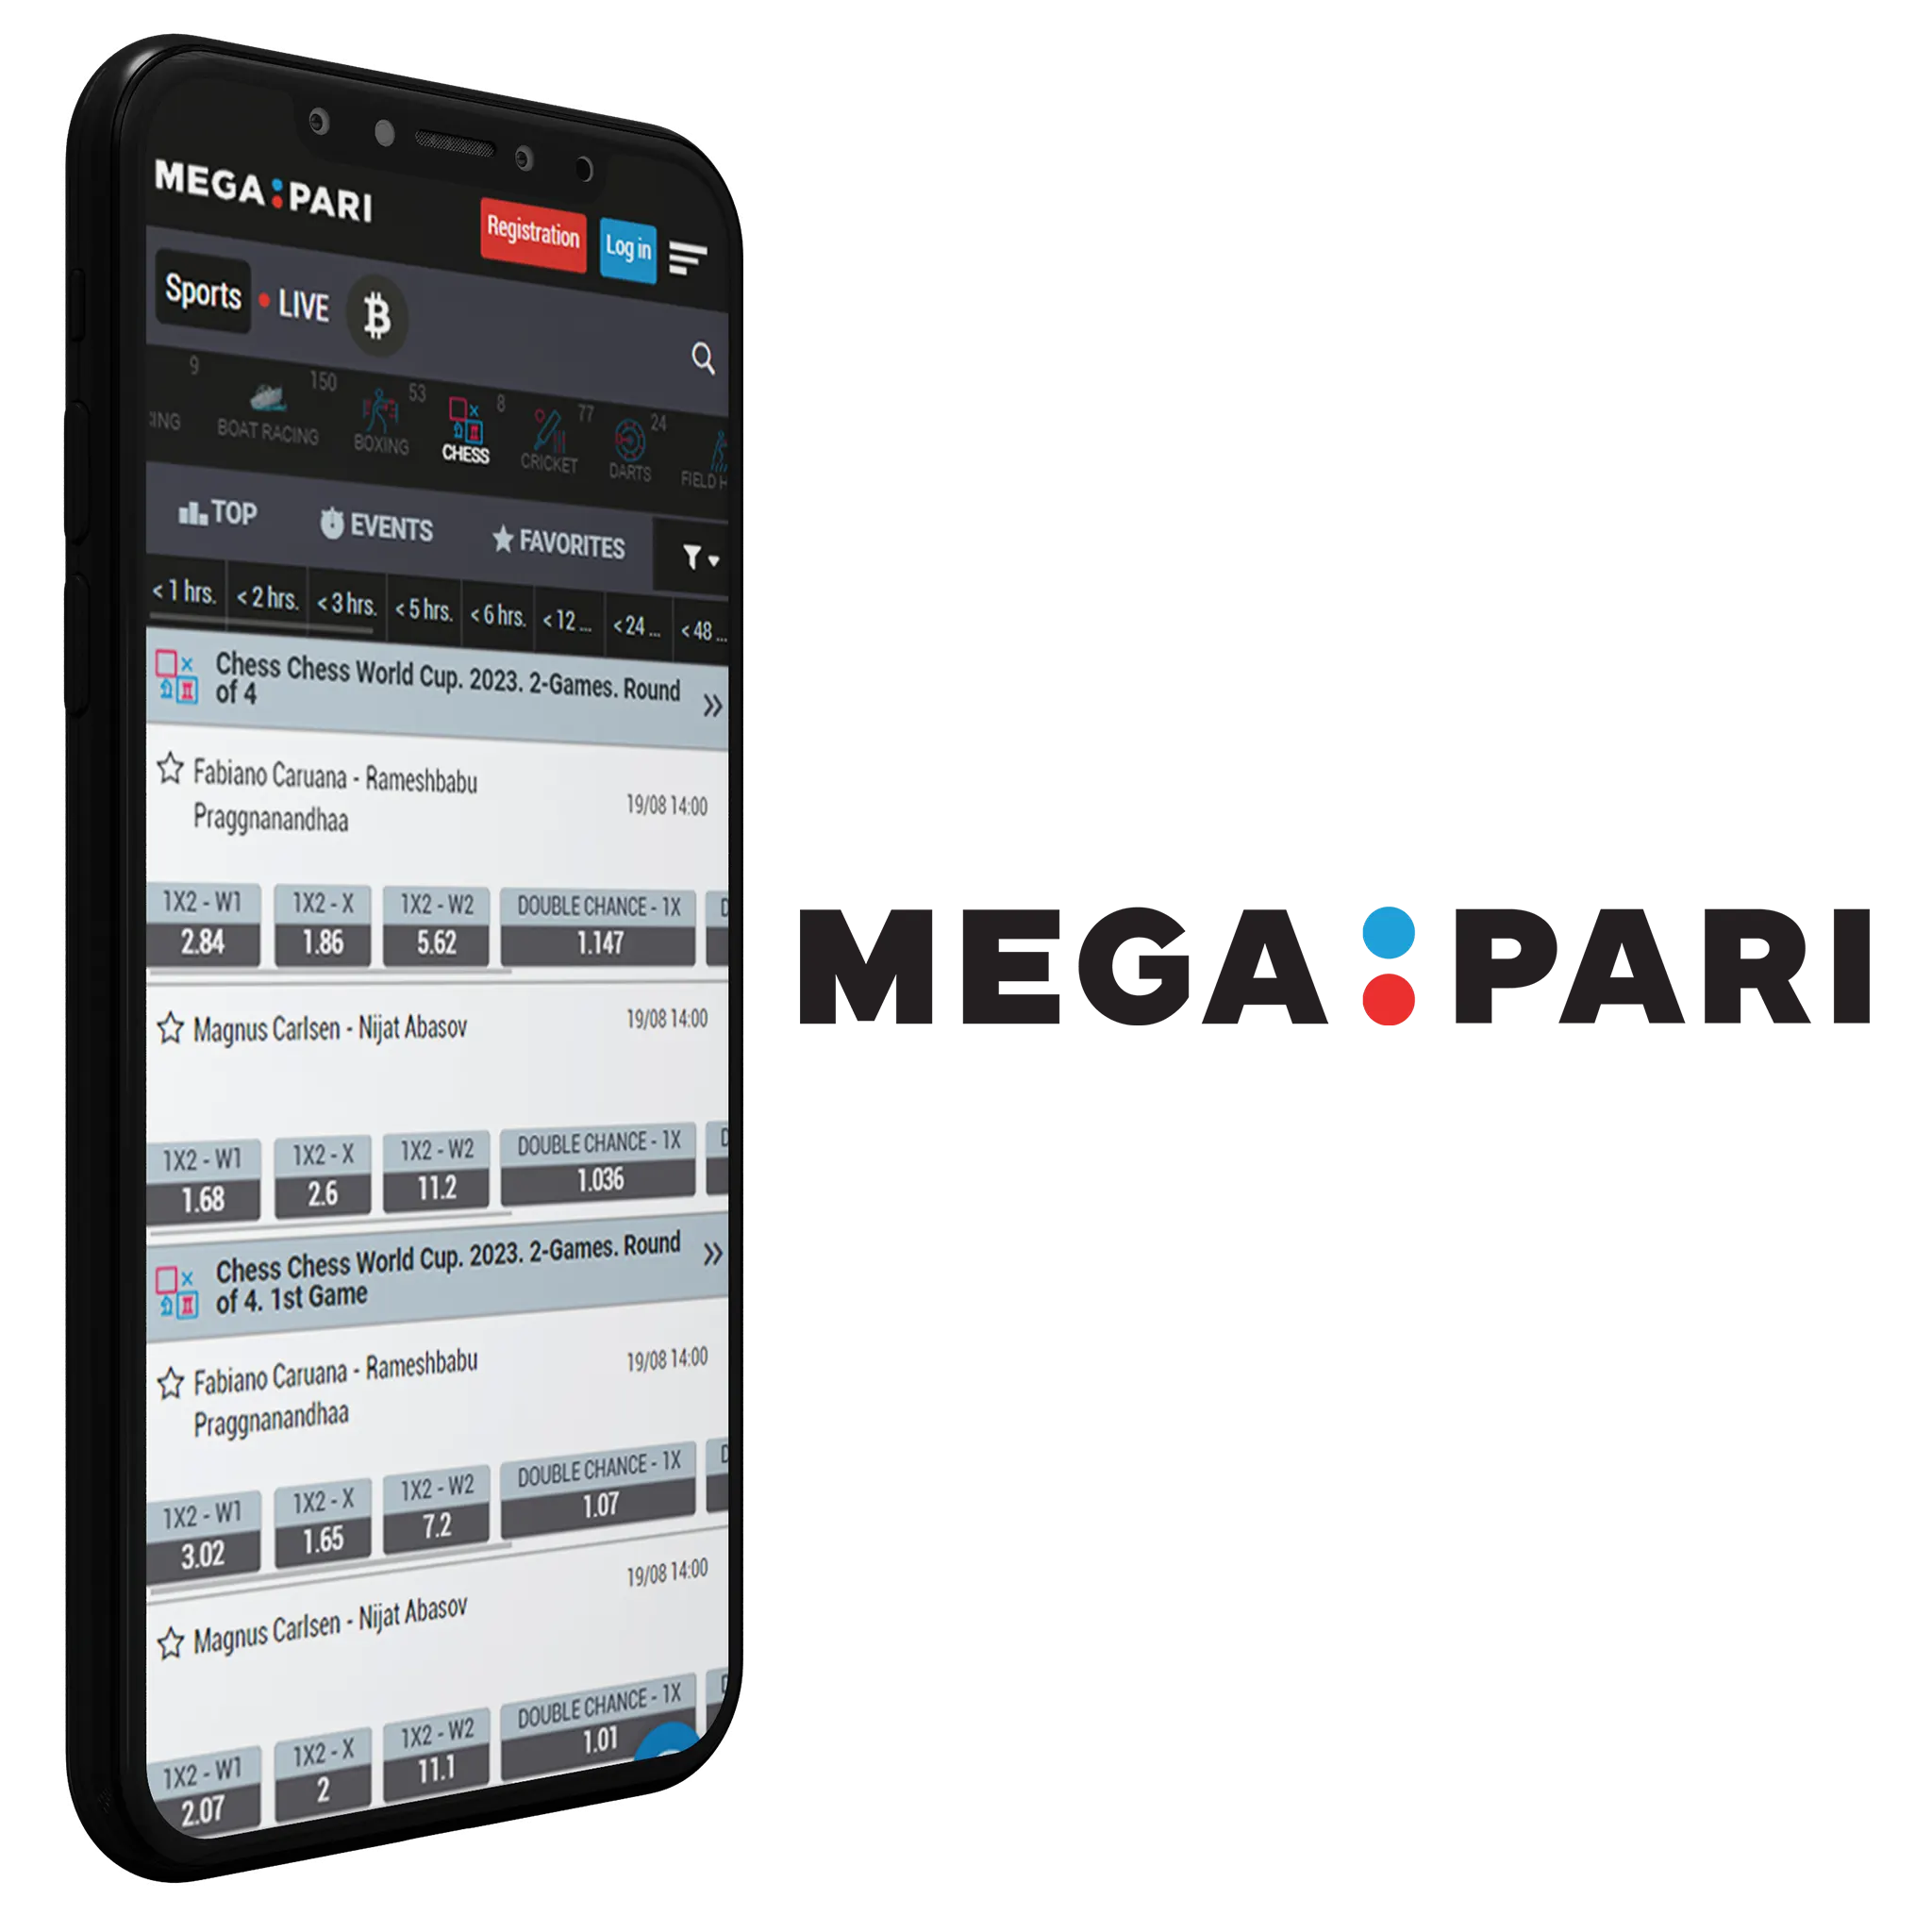 Megapari mobile app offers a huge number of events and tournaments for online chess game betting.